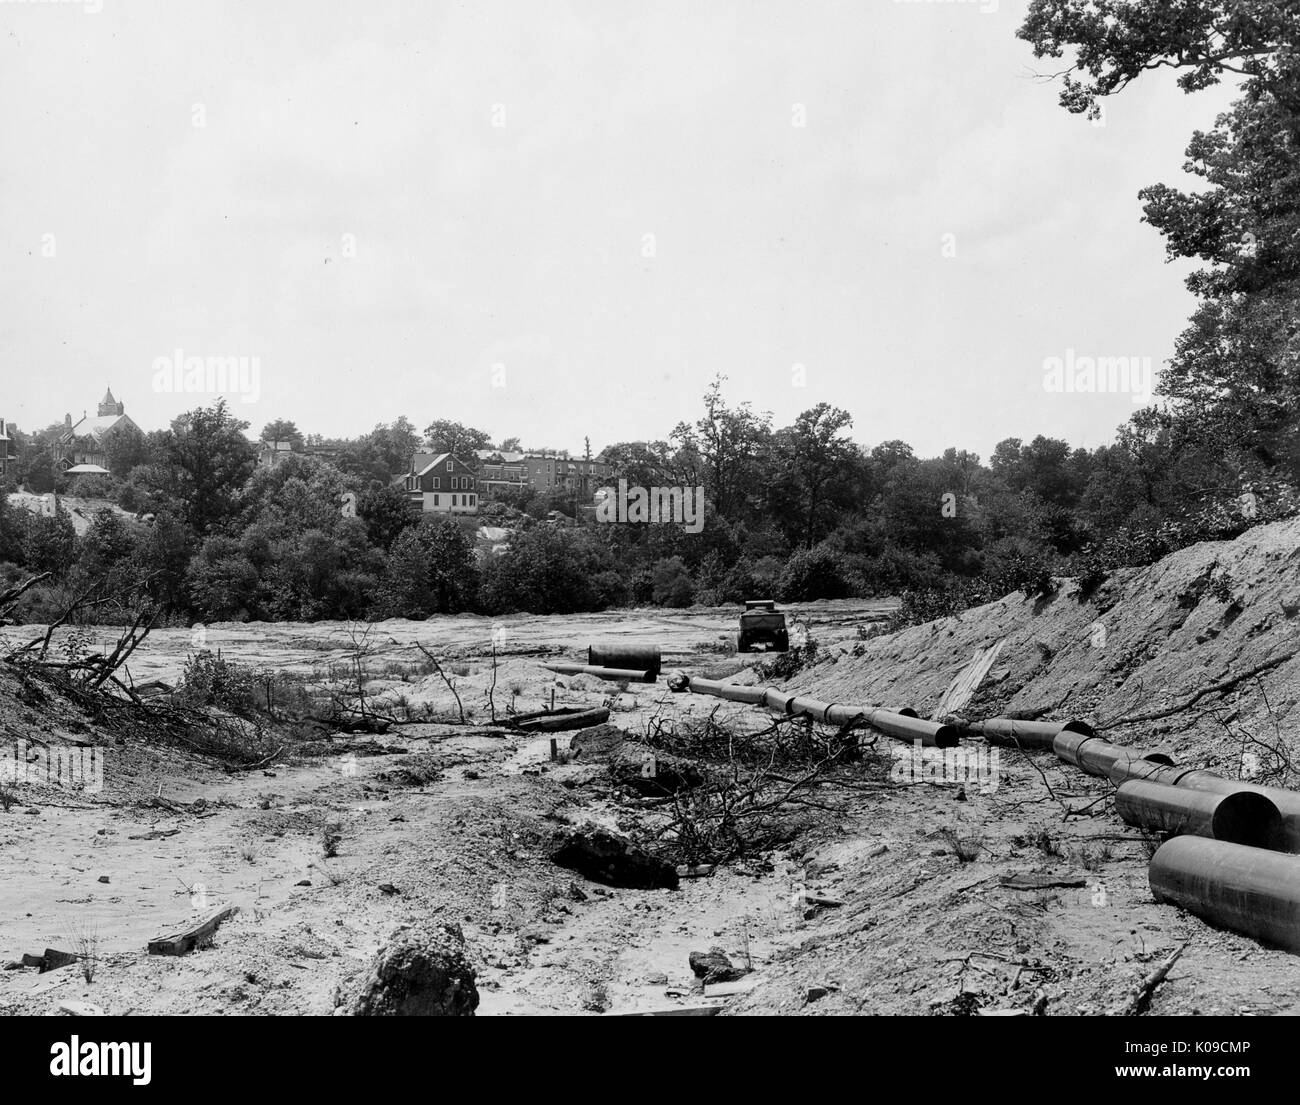 Northwood neighborhood land under construction, there are large pipes scattered on the uneven dirt, there are trees and houses in the background that are bordering the land, United States, 1950. Stock Photo